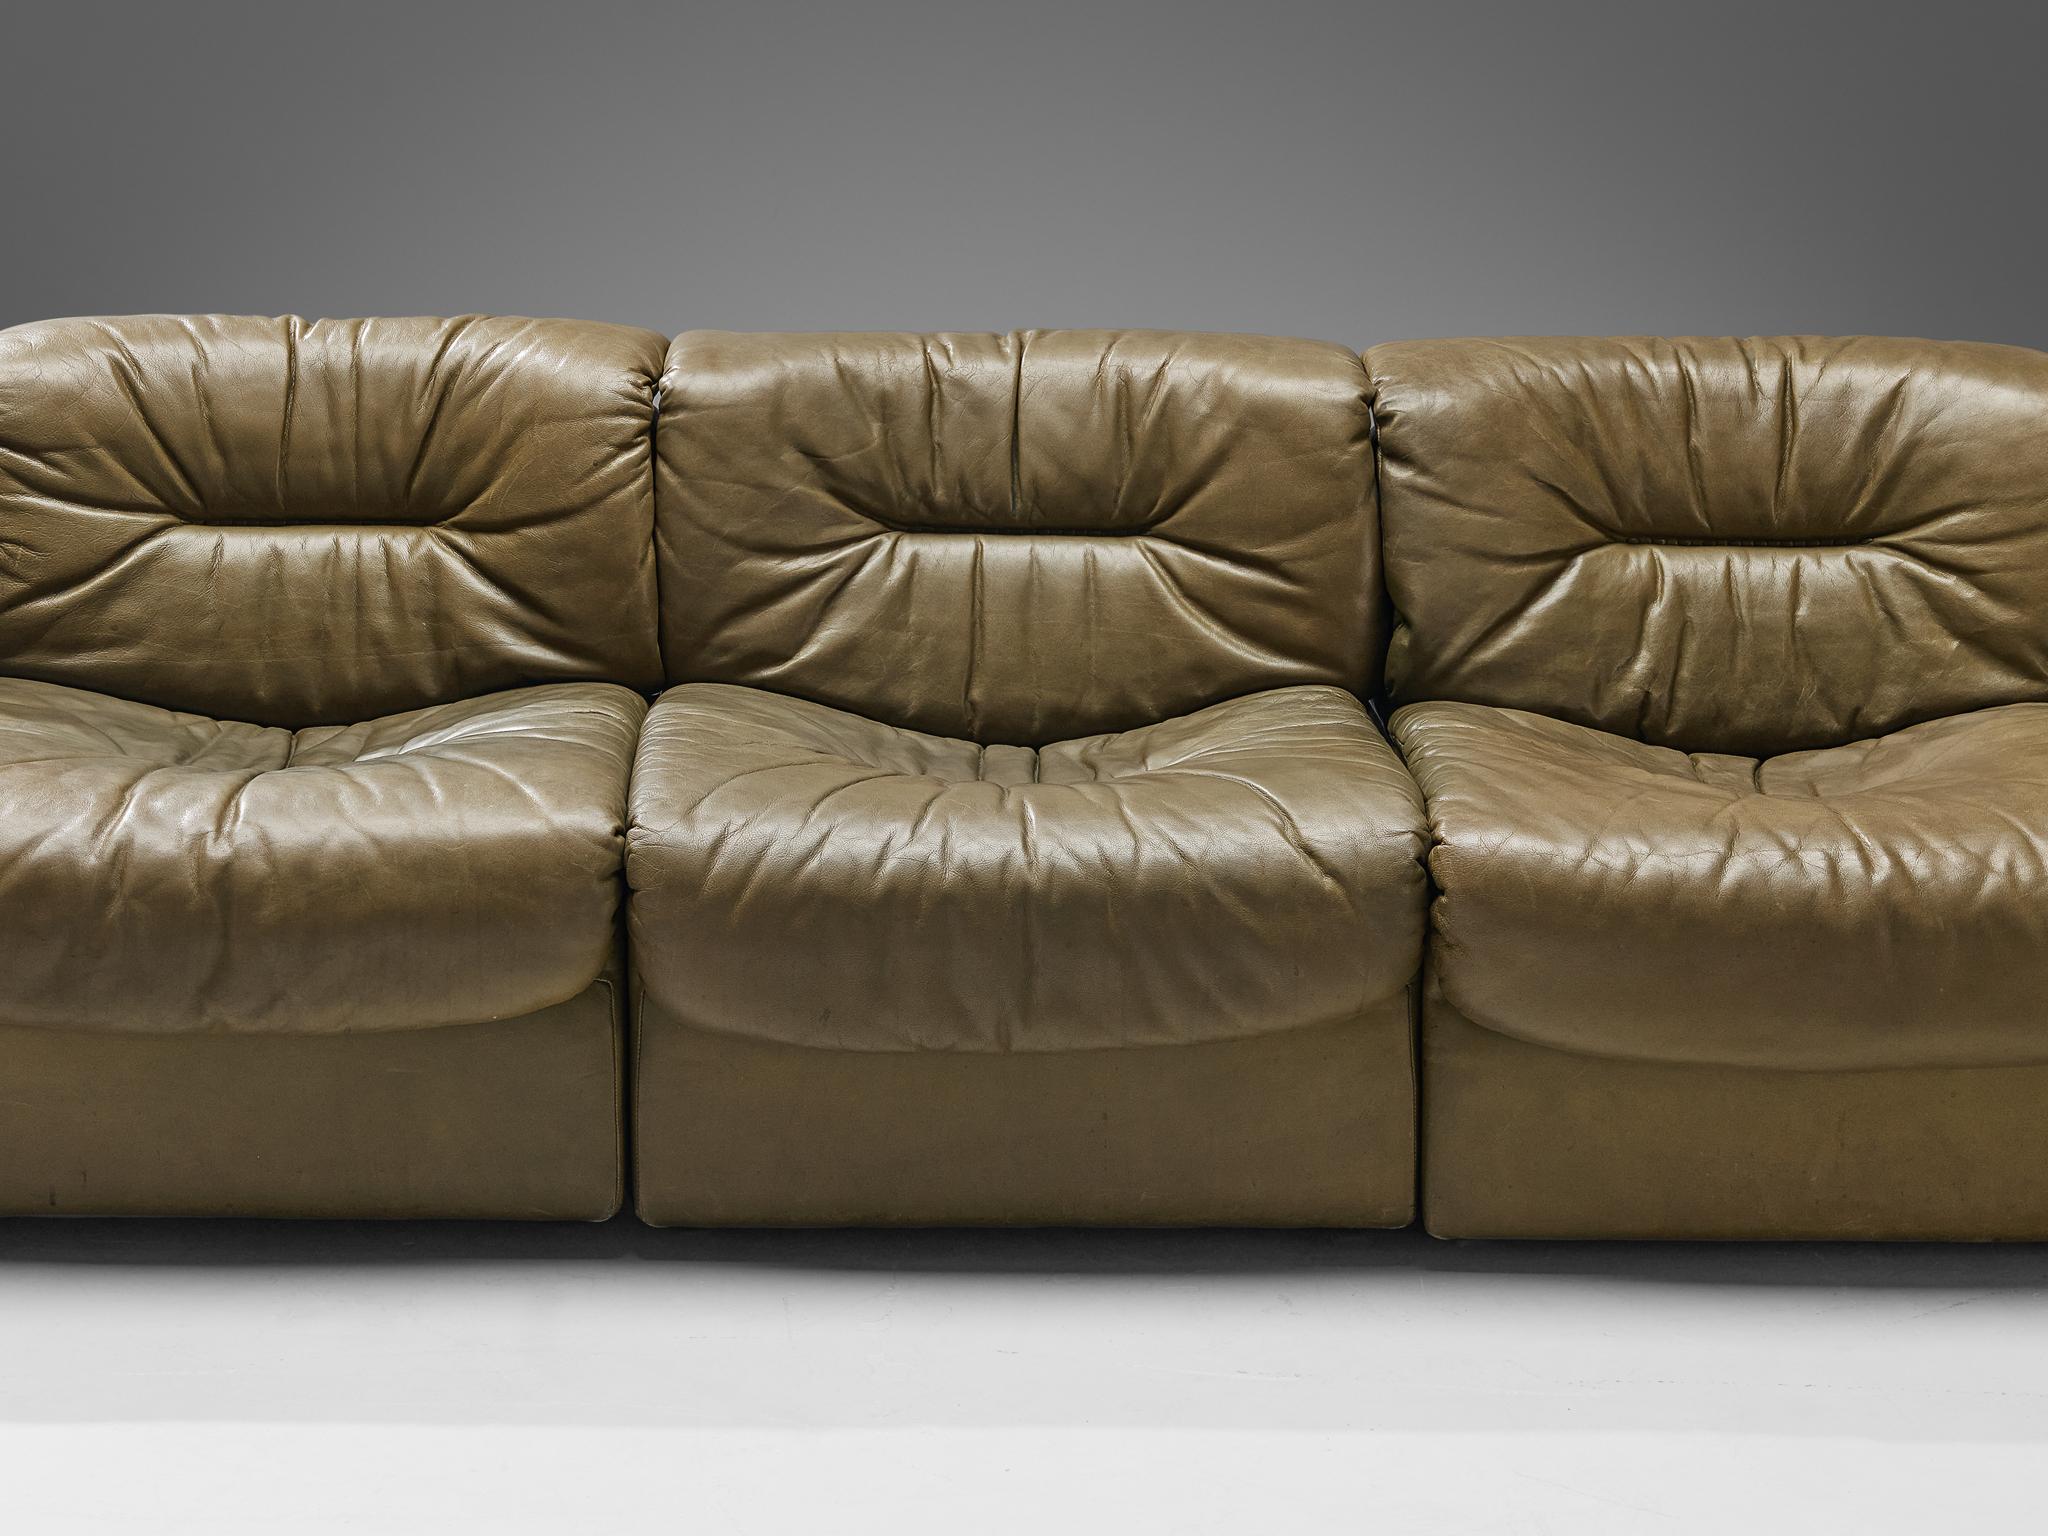 De Sede 'DS-14' Modular Sofa in Patinated Olive Green Leather For Sale 2